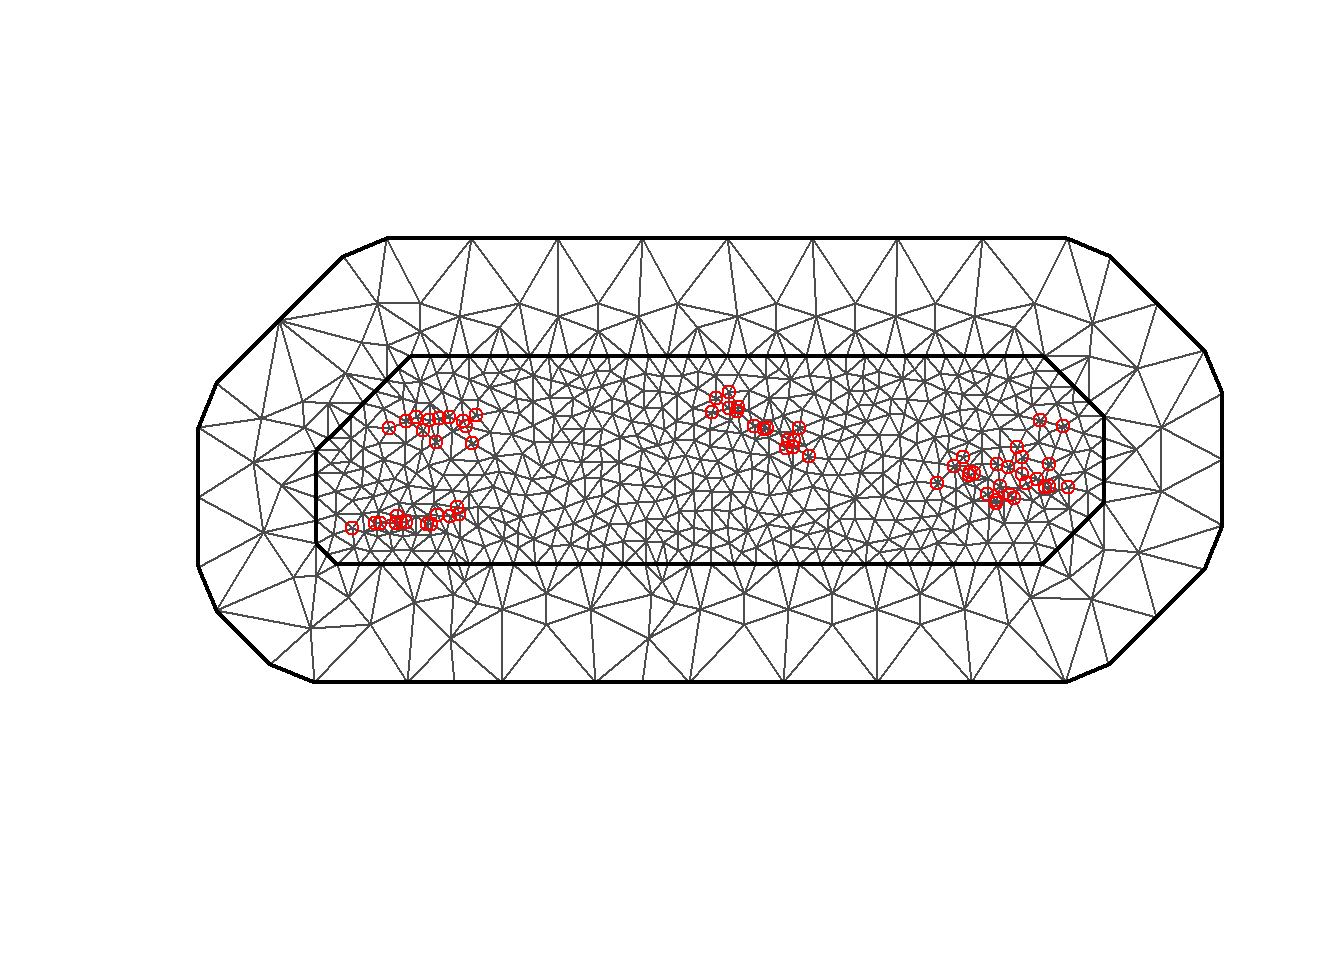 Figure 2: Triangulated Mesh used for the SPDE model.